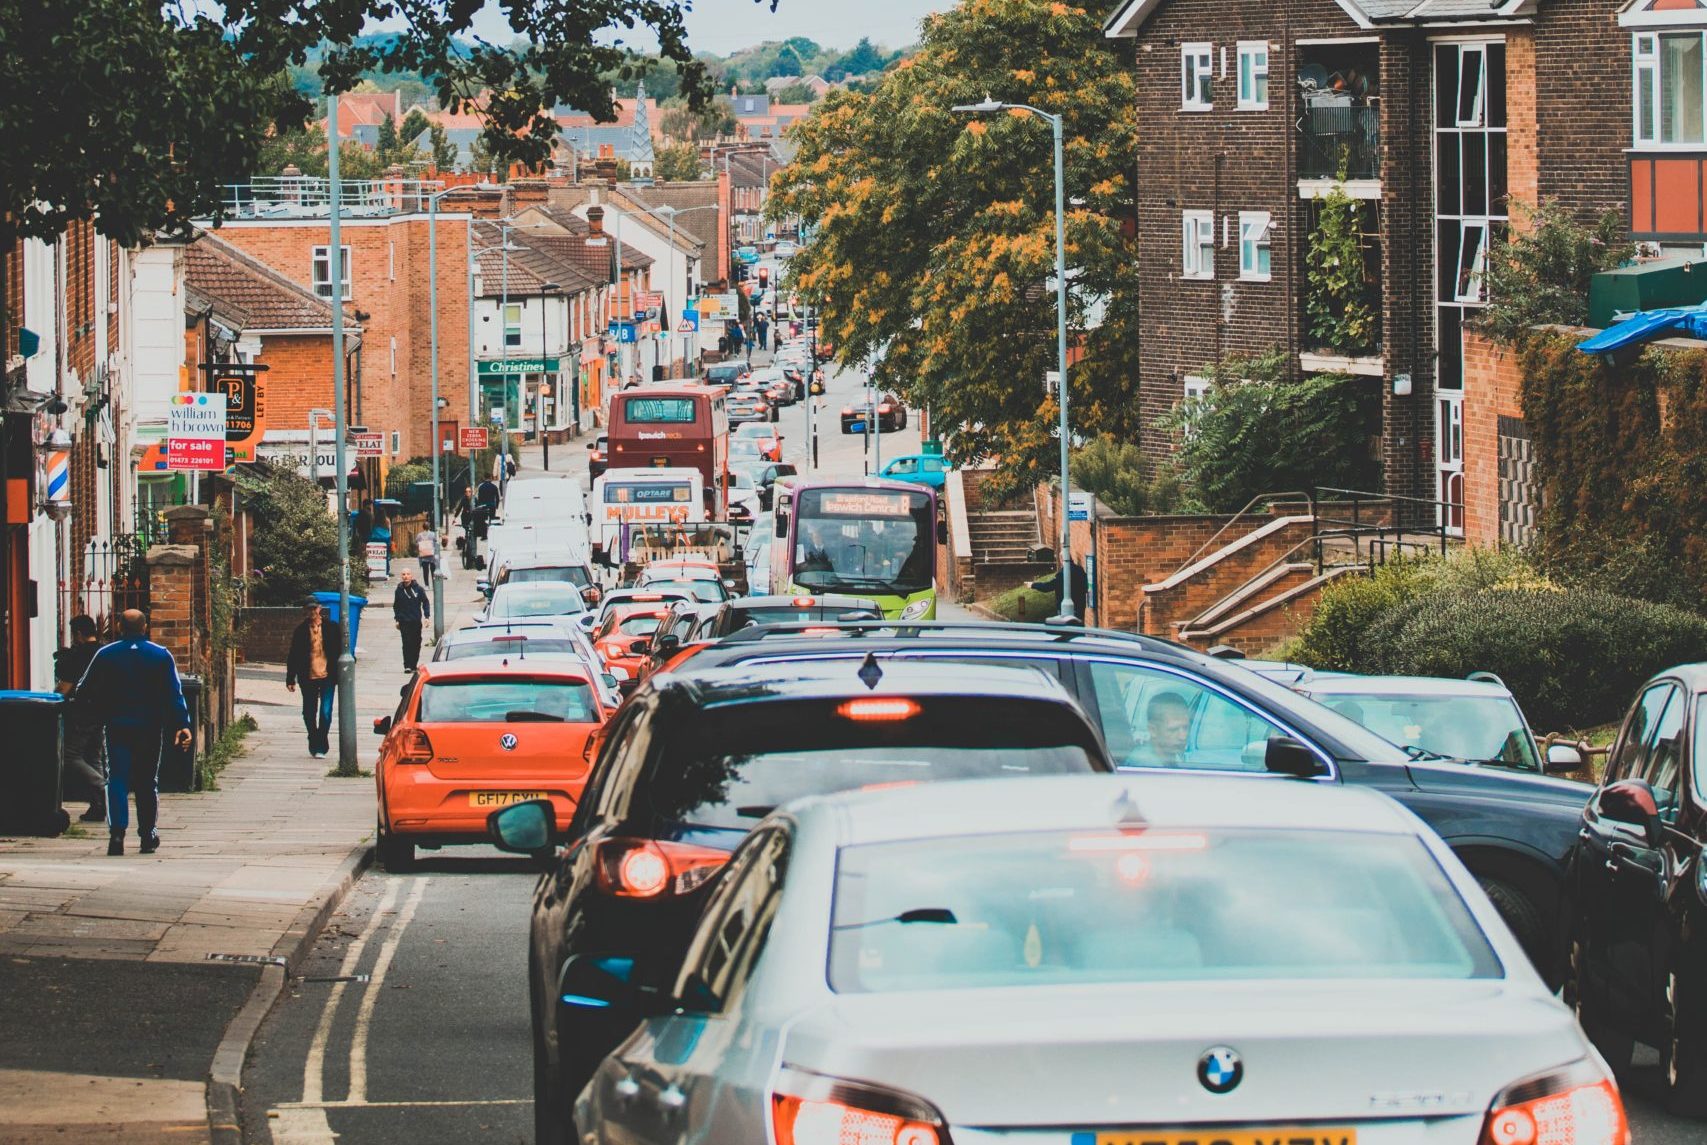 Traffic jam in a UK town